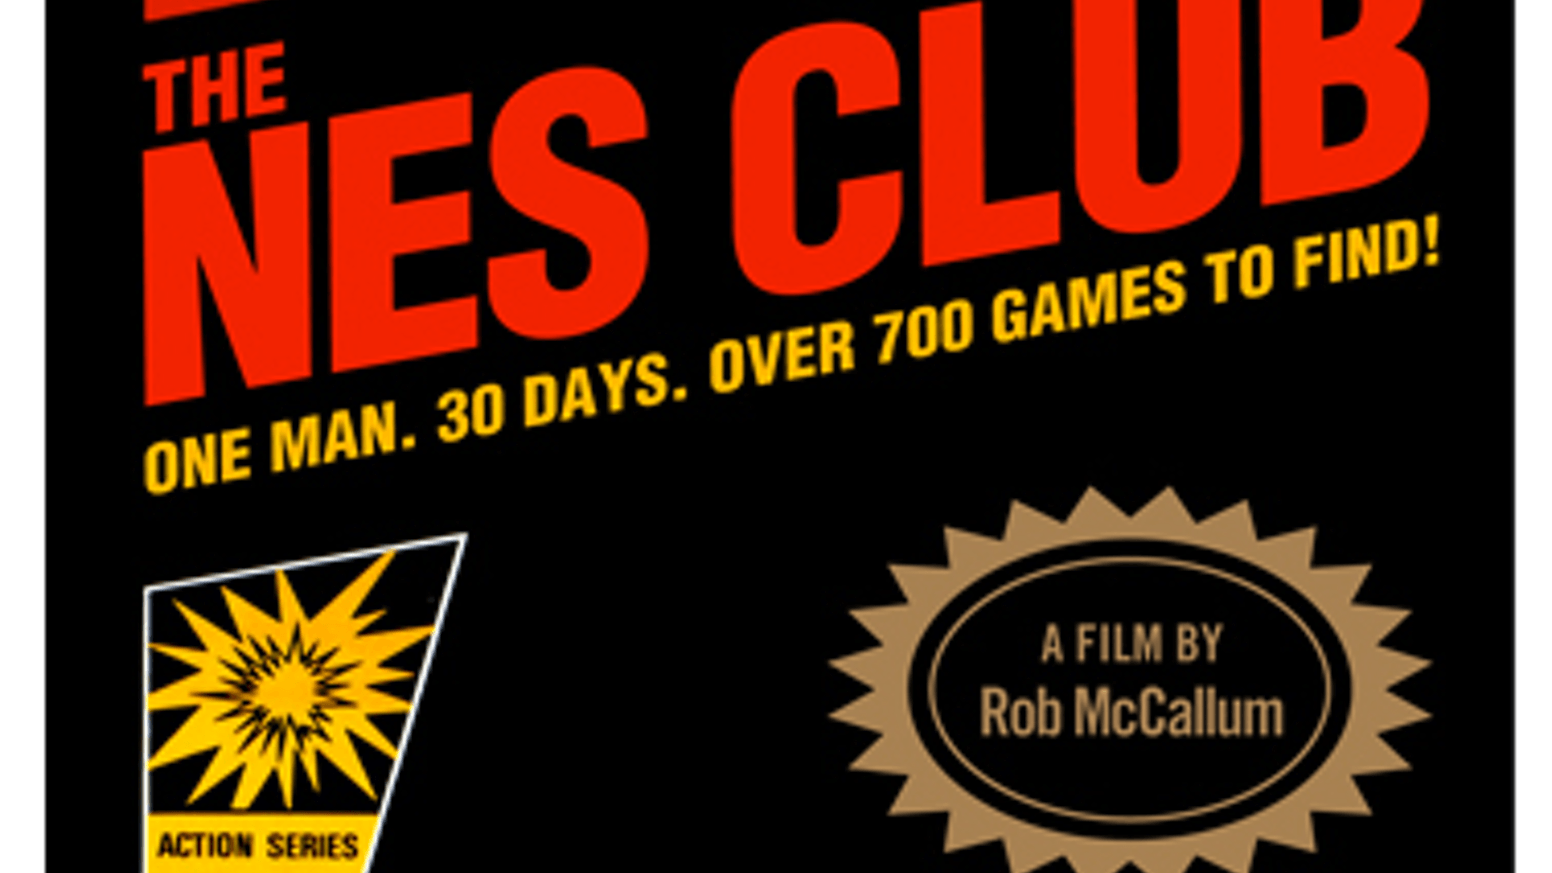 Google Plus in 8 Bit Logo - The NES Club: One Man • 30 Days • Over 700 Games To FIND! by Rob ...